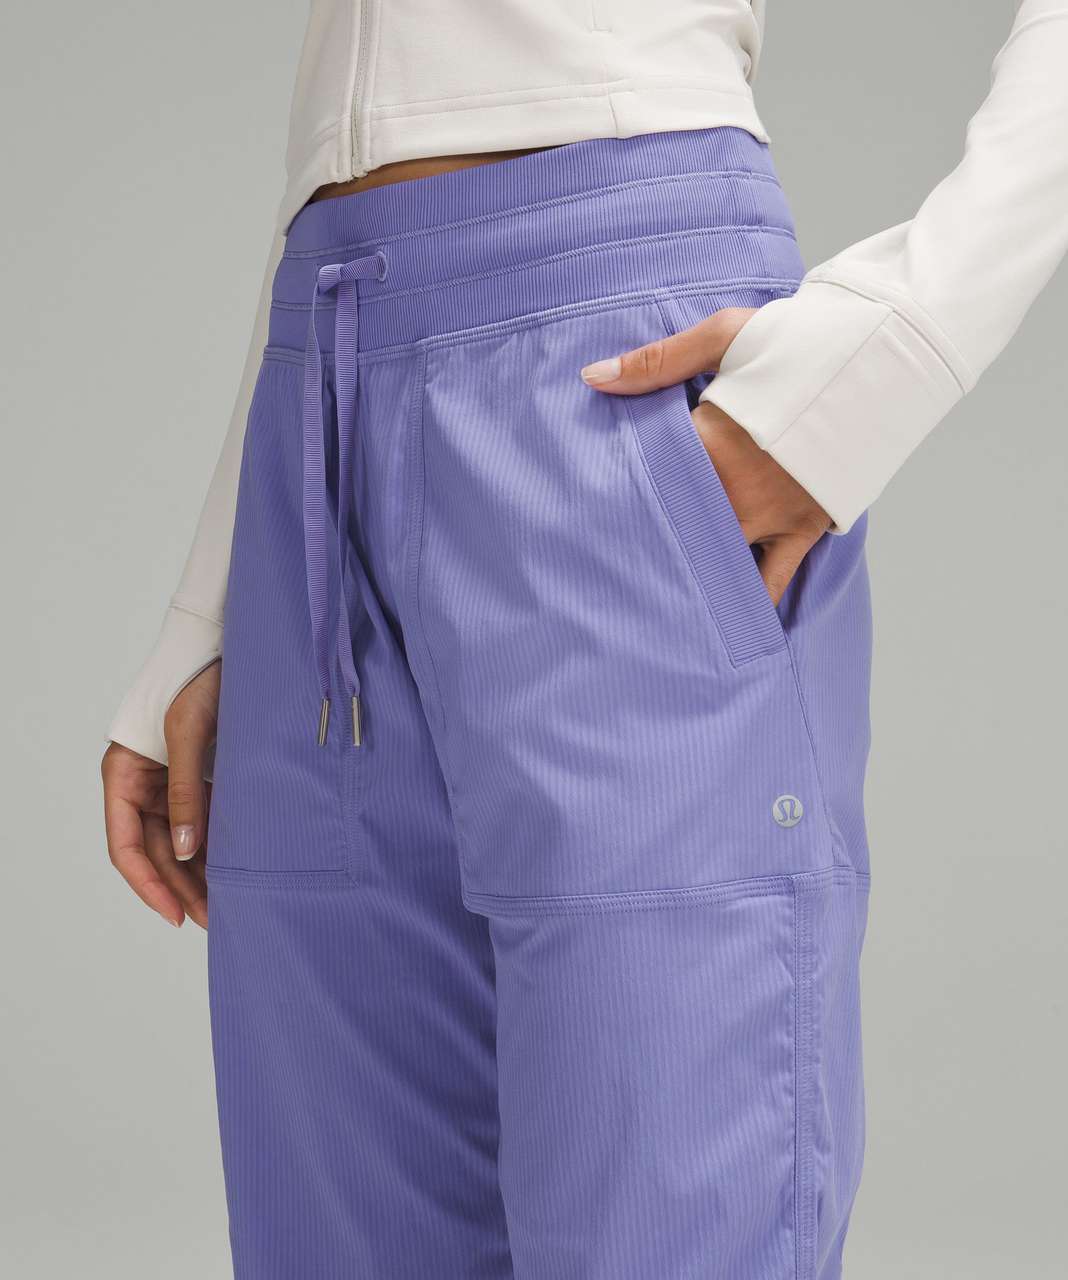 Lululemon Dance Studio Pant Purple Size 2 - $90 (23% Off Retail) New With  Tags - From Morgan